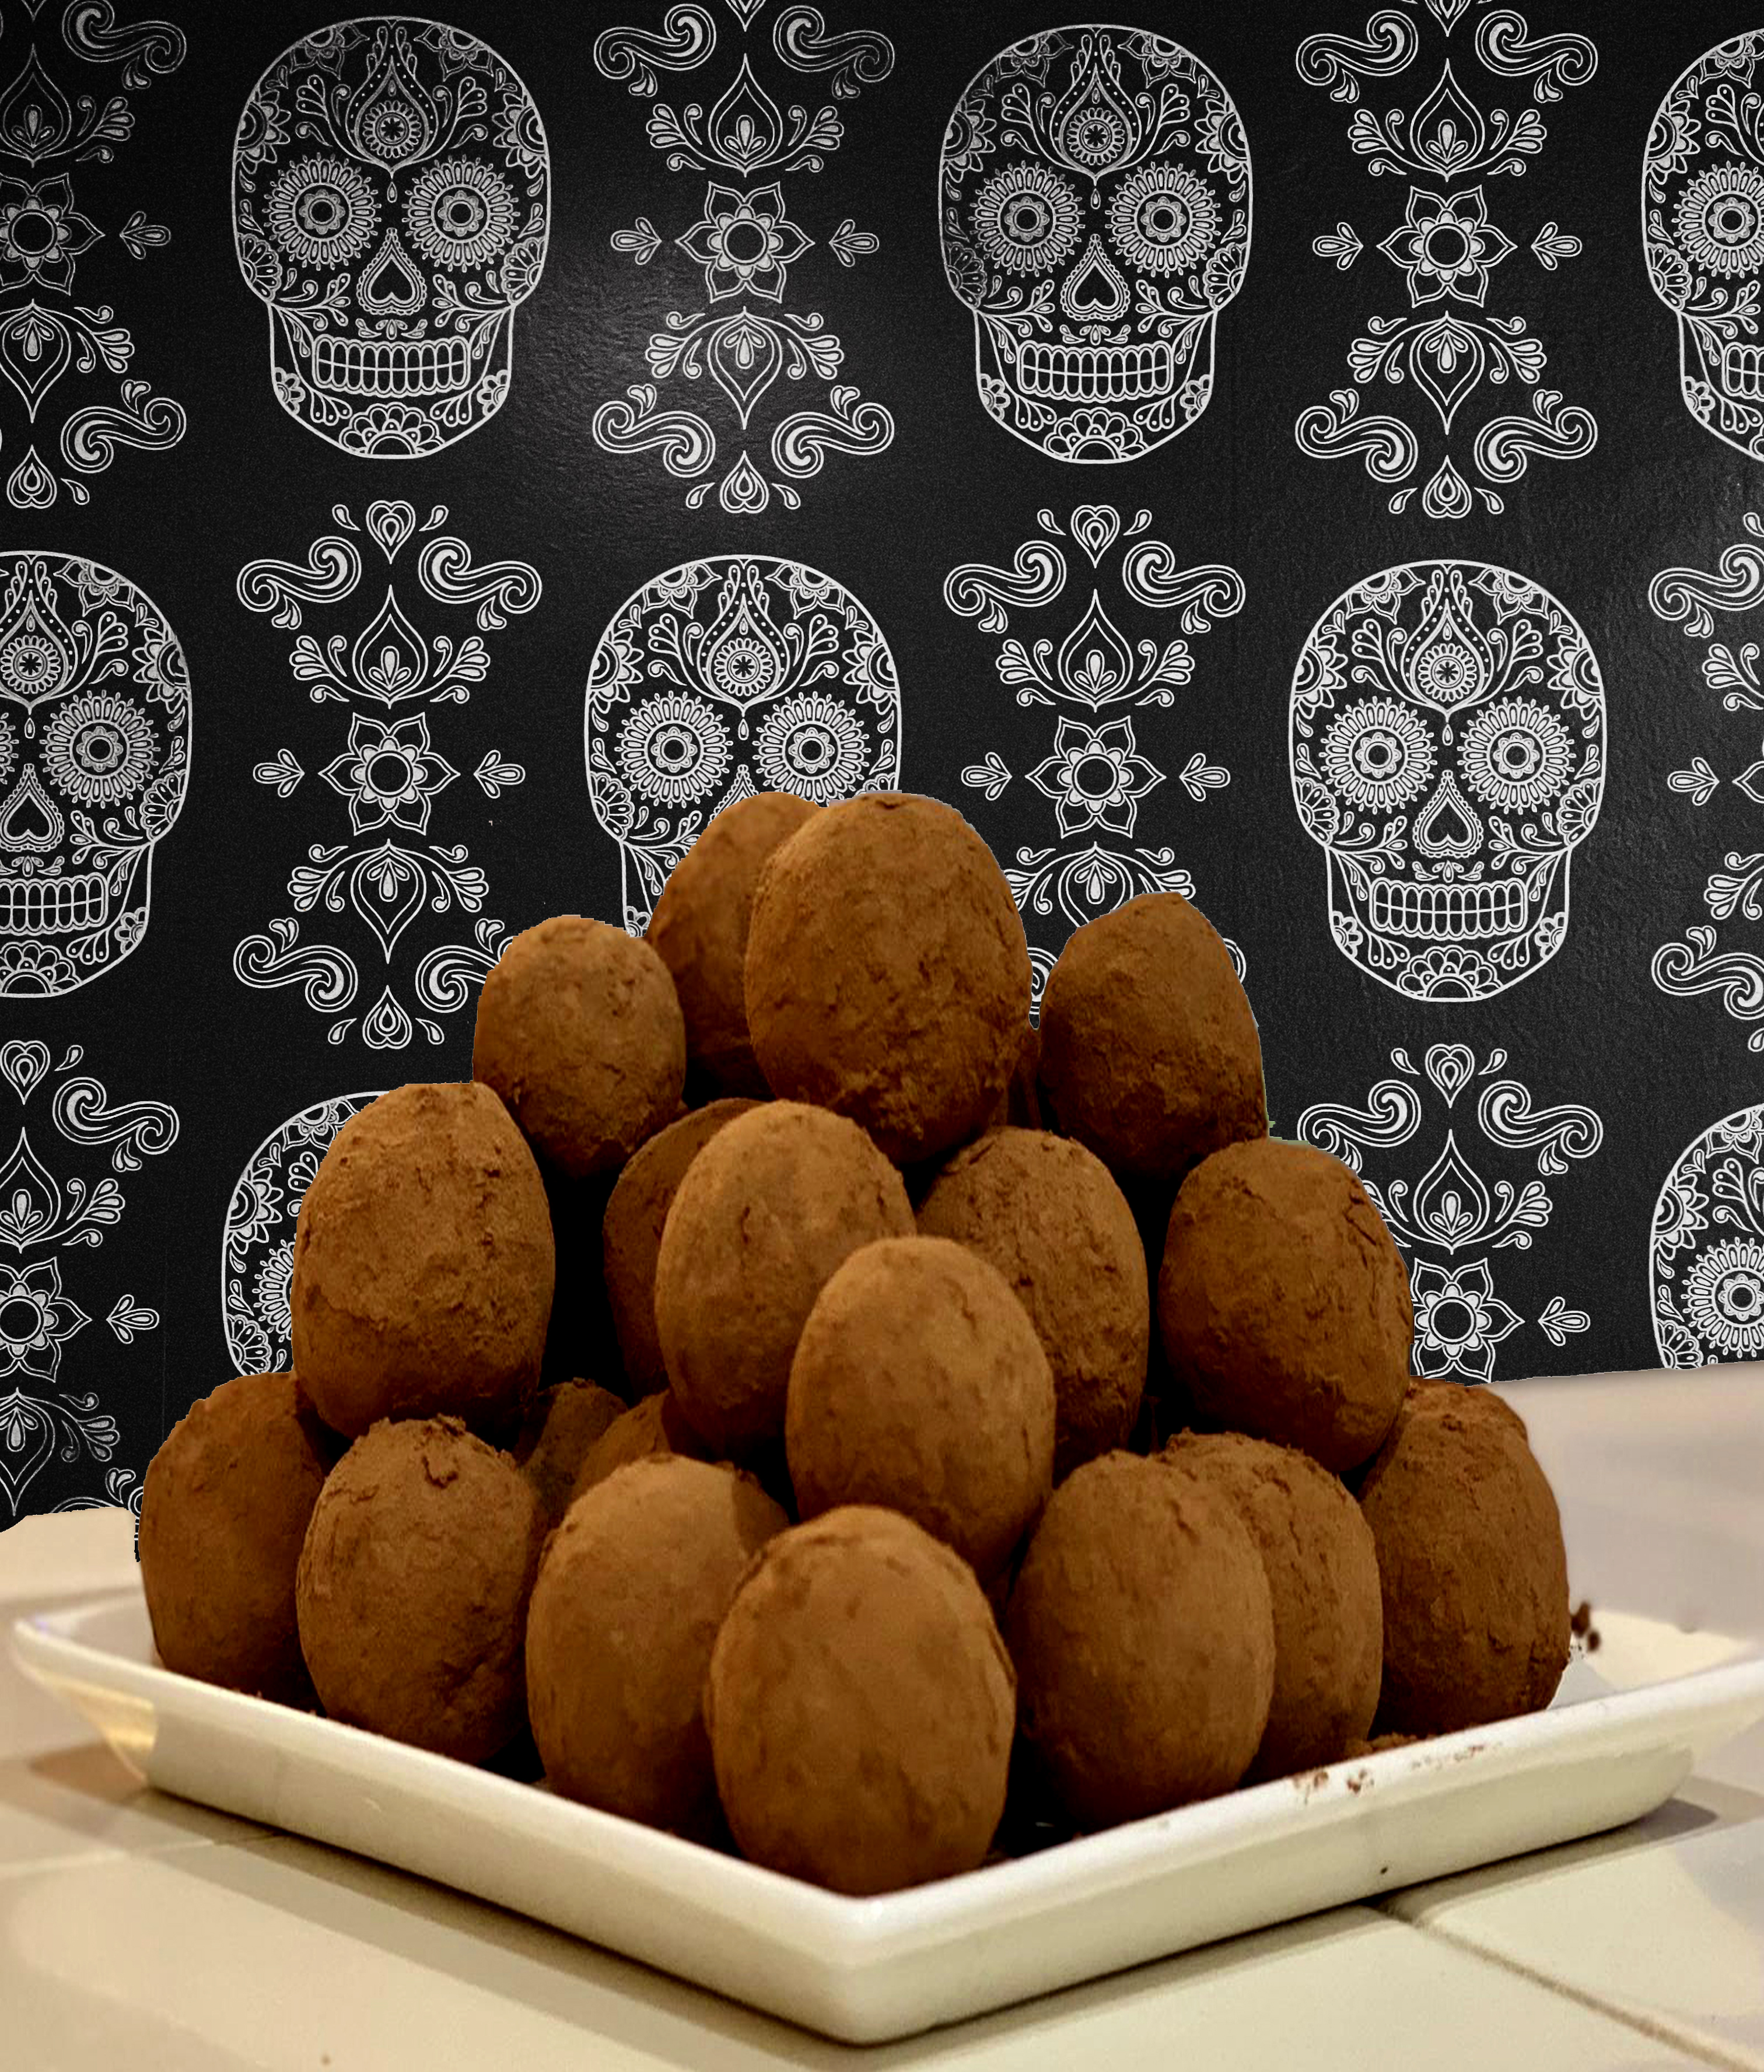 truffles piled on a plaet